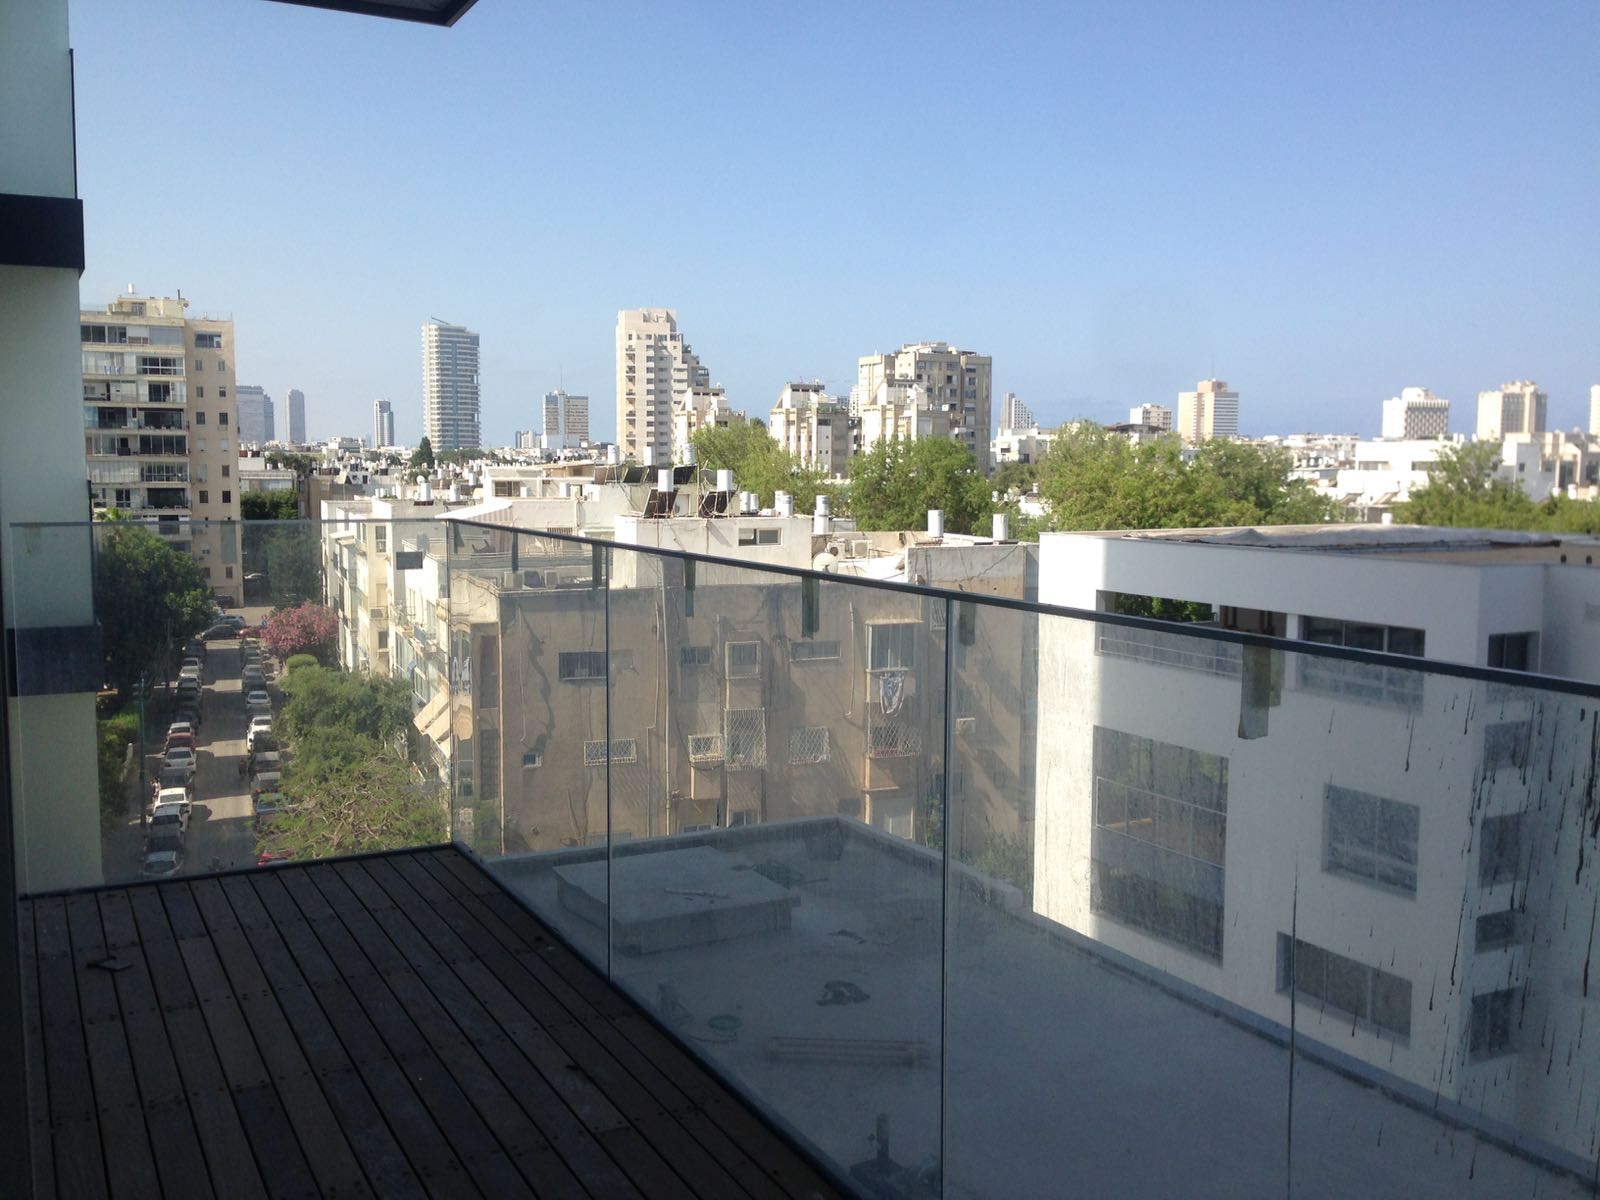 2 Bedroom Apartment for Sale in the New Assuta Tower in Tel Aviv’s Old North